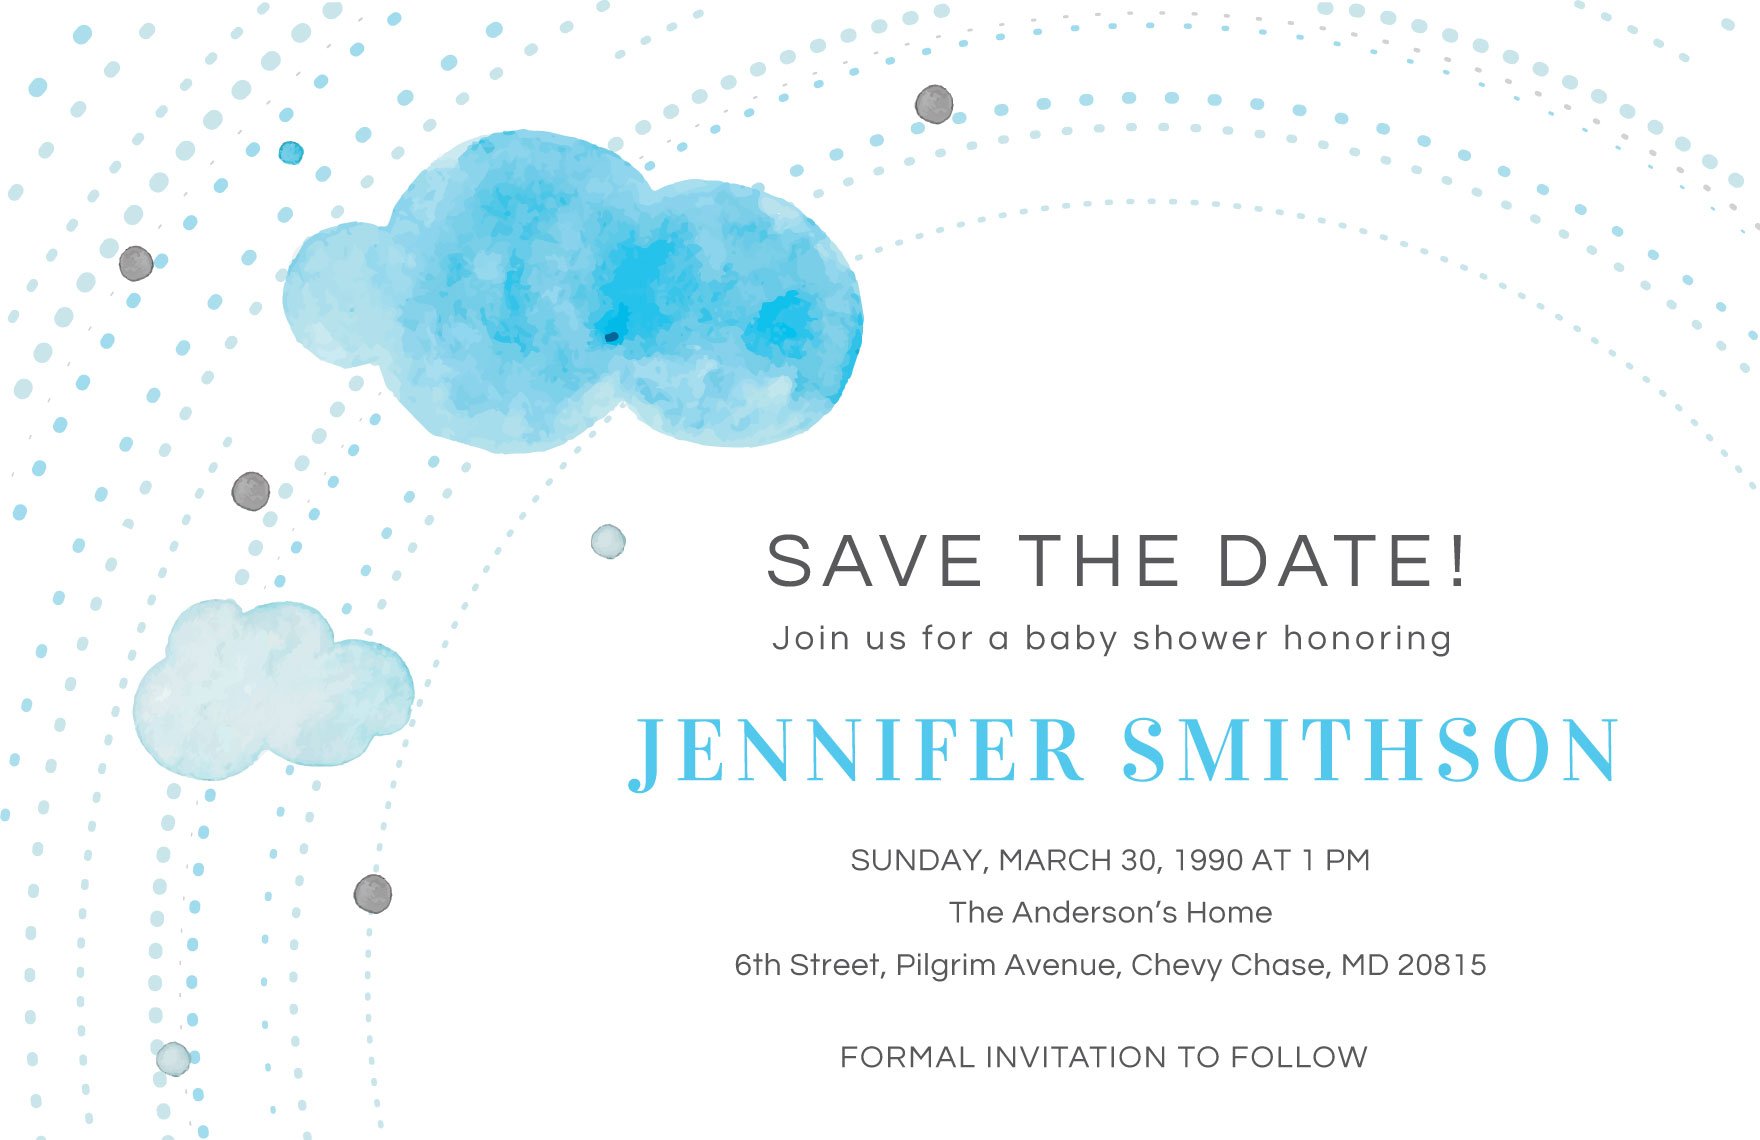 Save the Date Baby Shower Invitation Template in Word, Illustrator, PSD, Apple Pages, Publisher